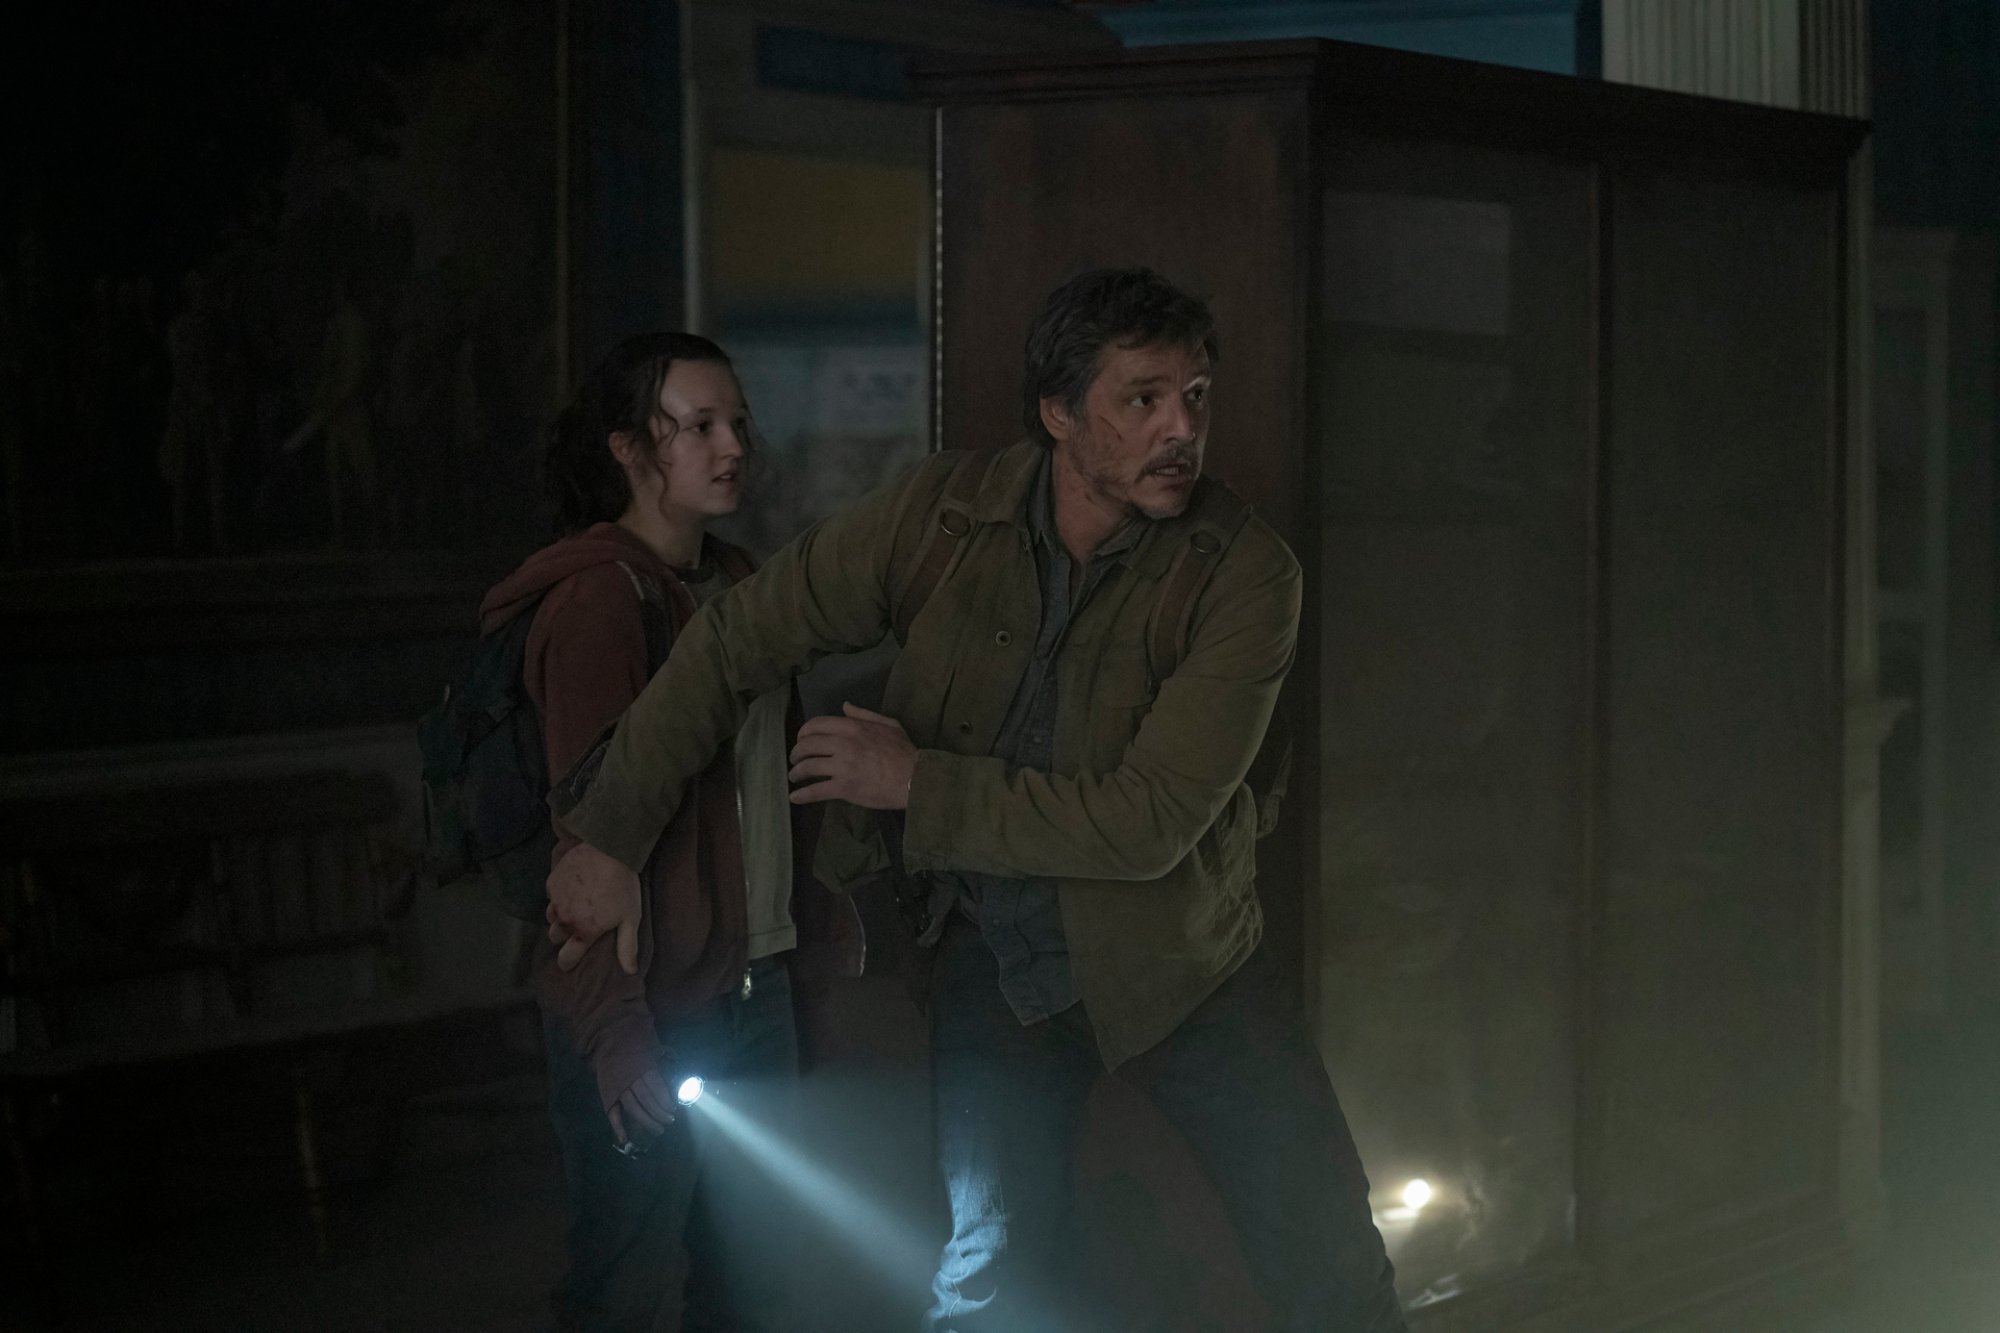 'The Last of Us' Bella Ramsey as Ellie and Pedro Pascal as Joel in show with controversy. They're standing in a dark room with Ellie holding a flashlight and Joel protectively holding his arms over her